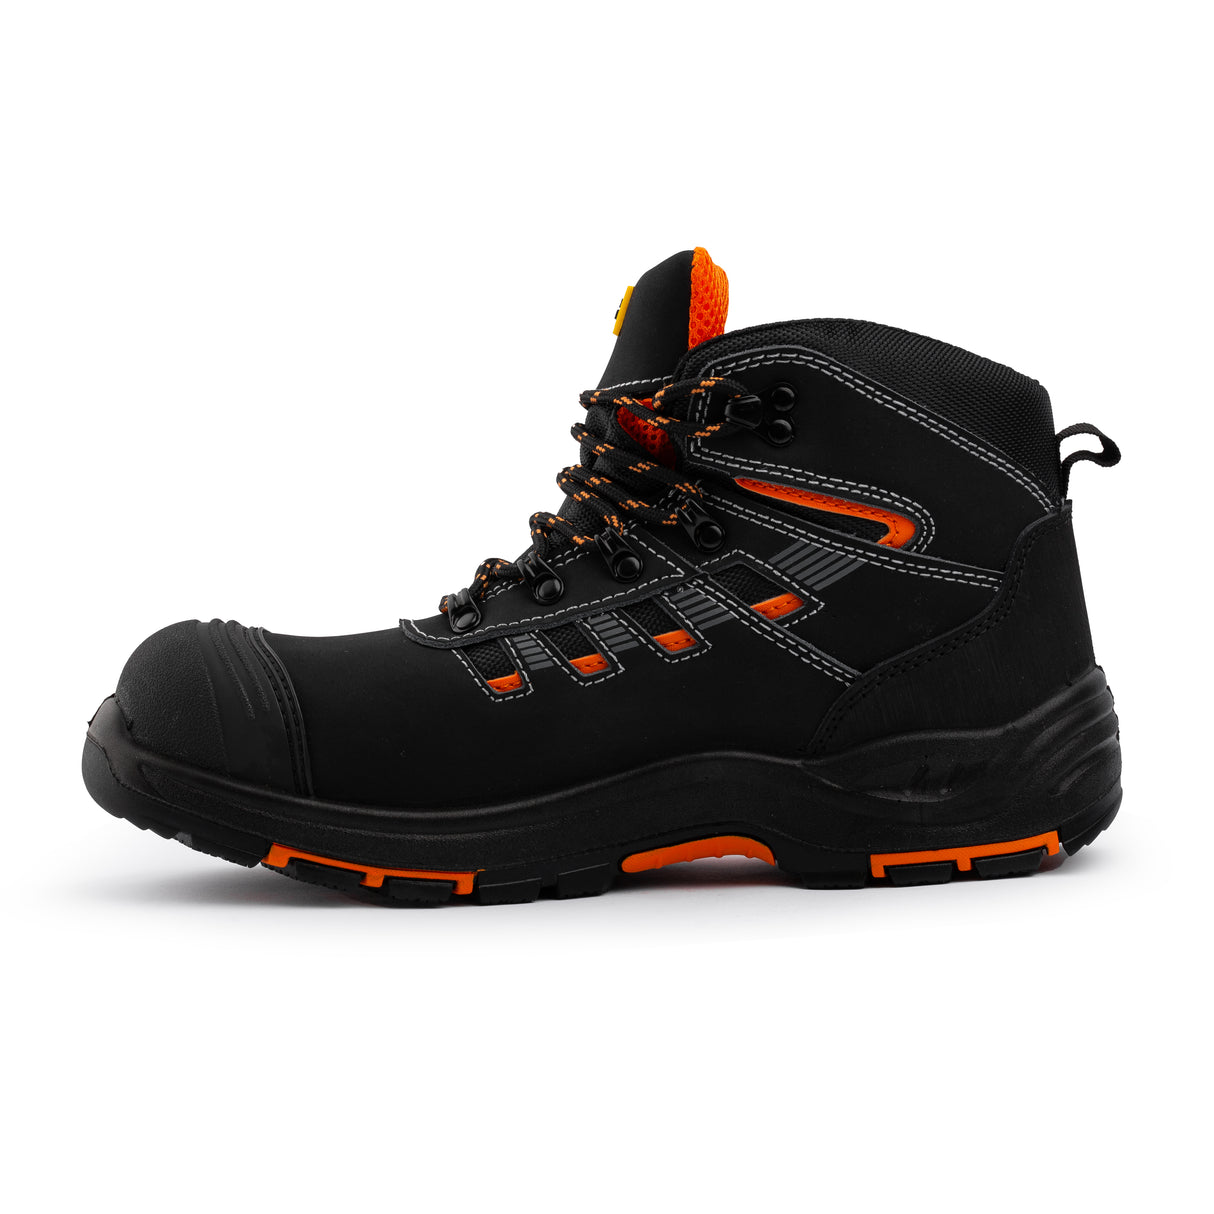 Trooper Safety Boots for Men with Steel Toe Cap & Steel Midsole